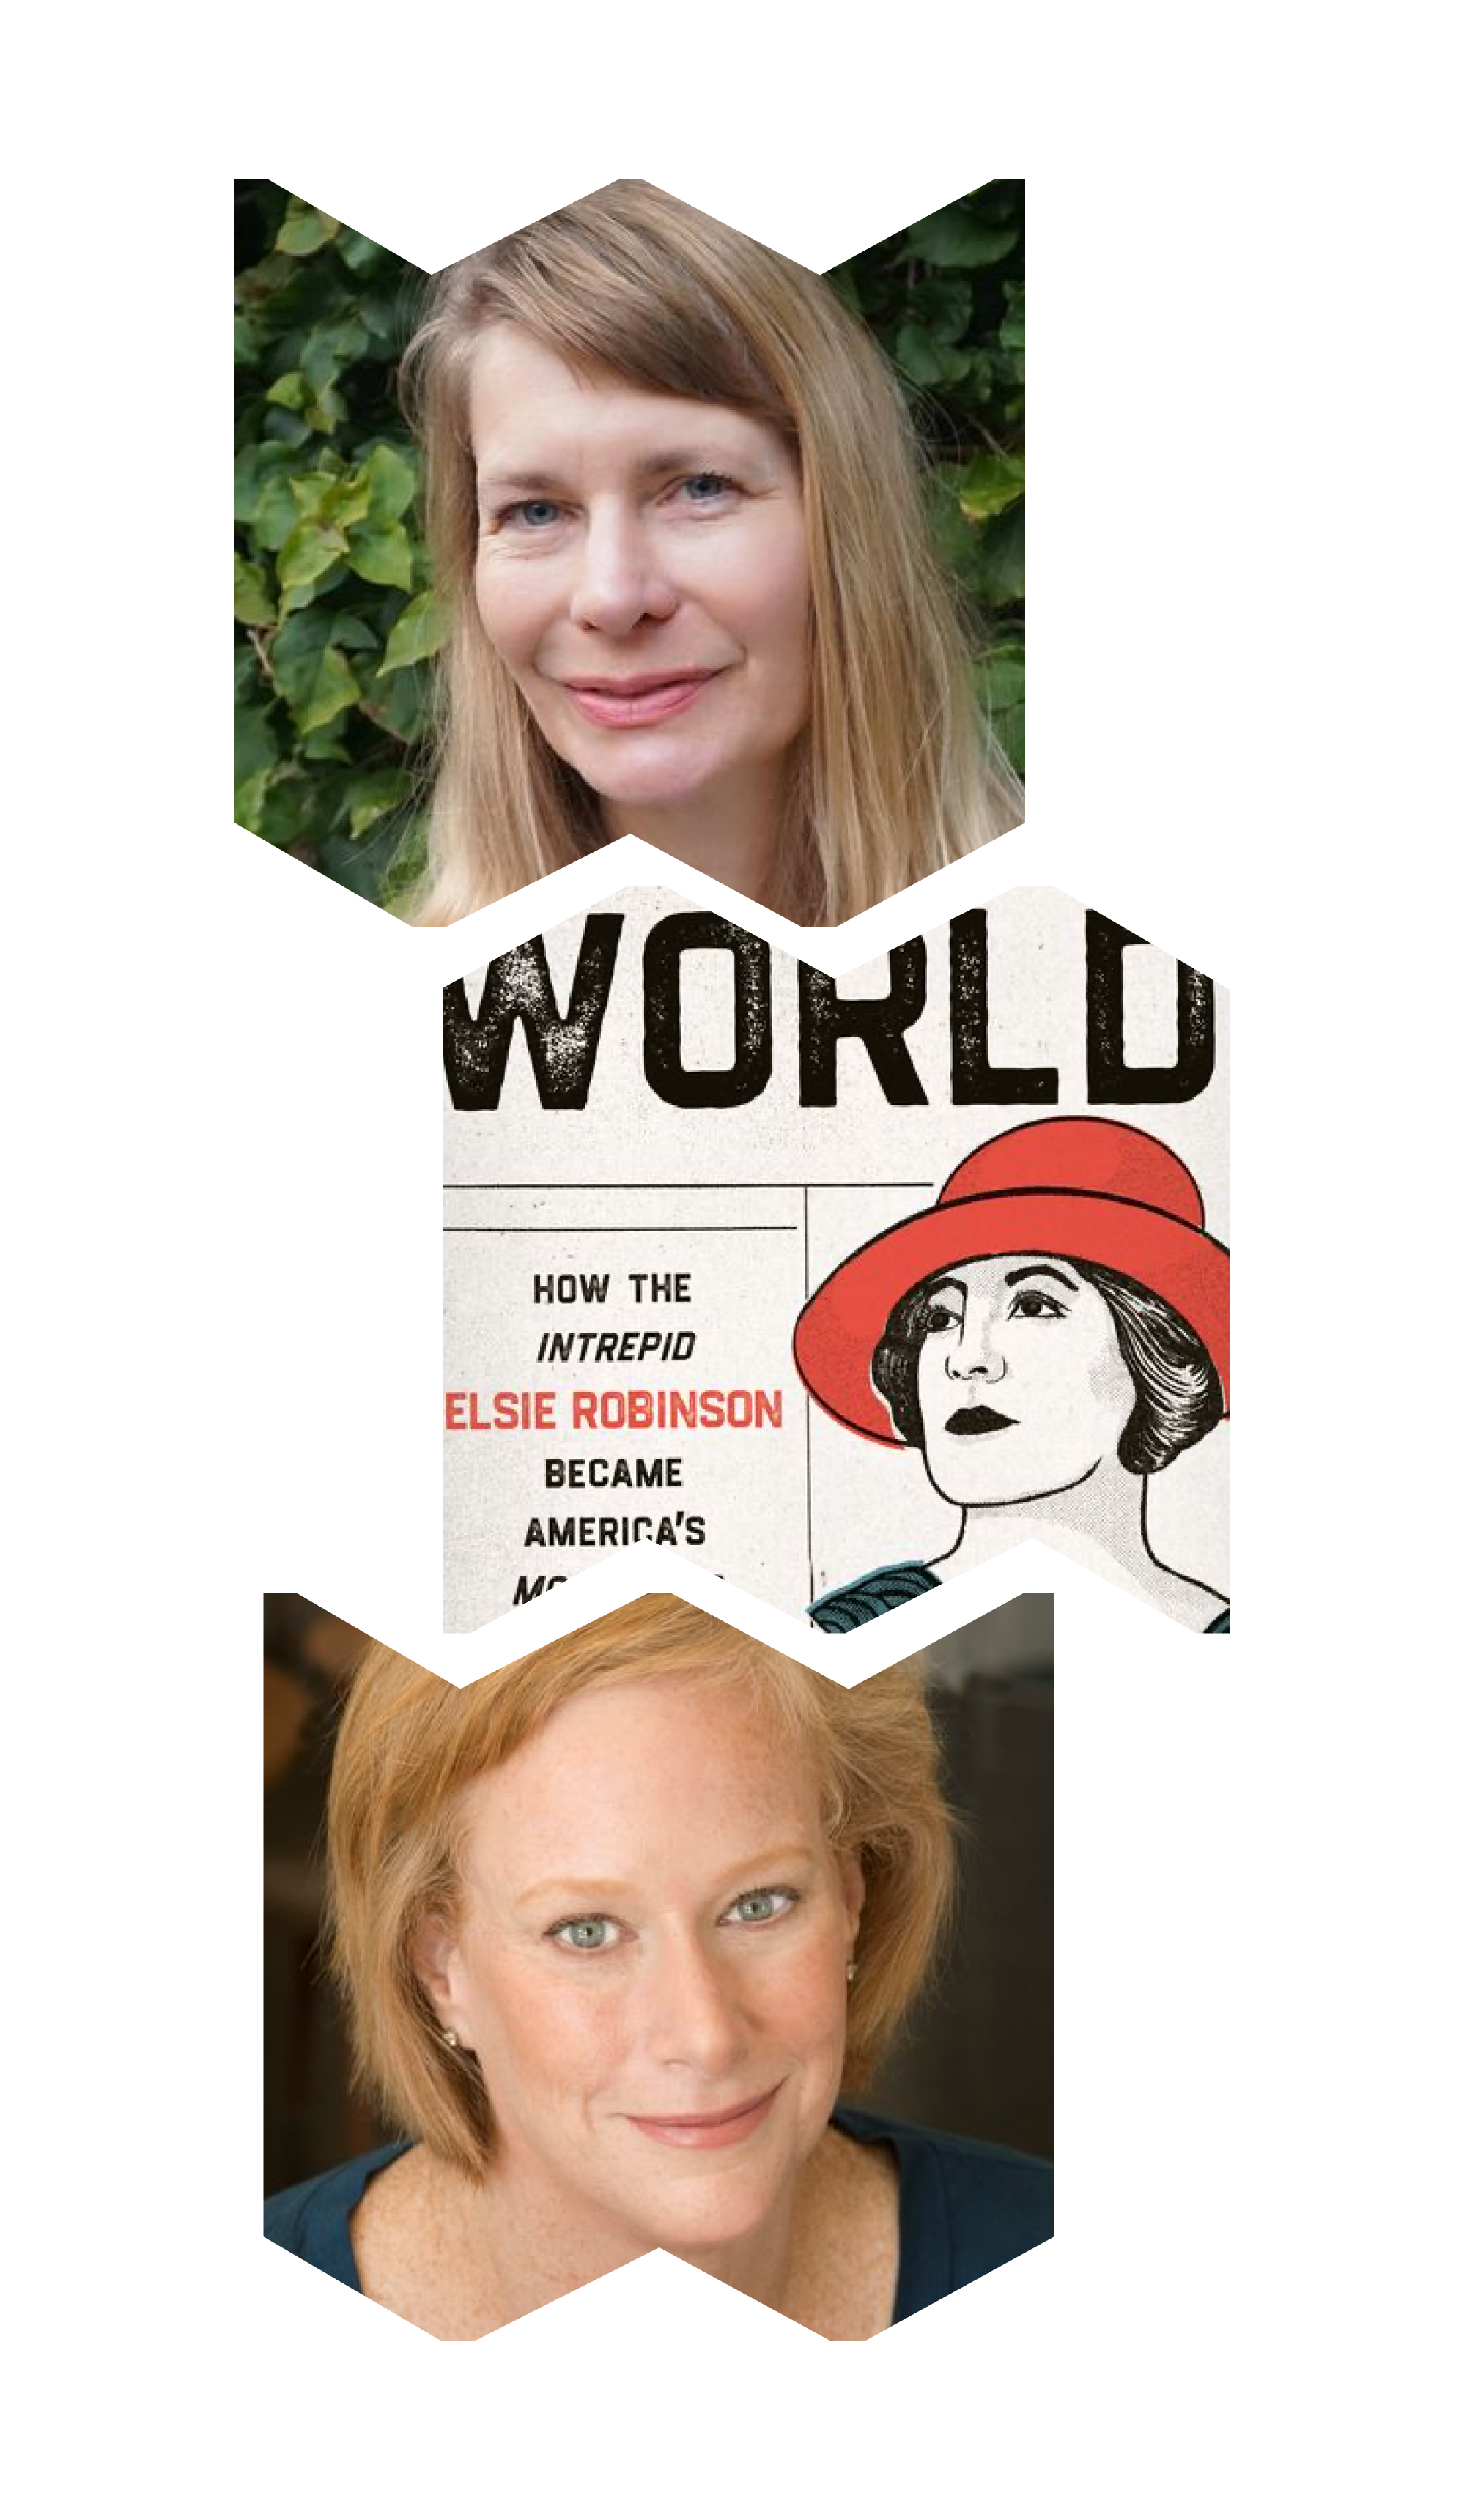 Top "W" frame with headshot of Julia Scheeres; center "M" frame, cover image of book that says "Listen, World" with illustration of Elsie Robinson's head; bottom "W" frame, headshot of Allison Gilbert.